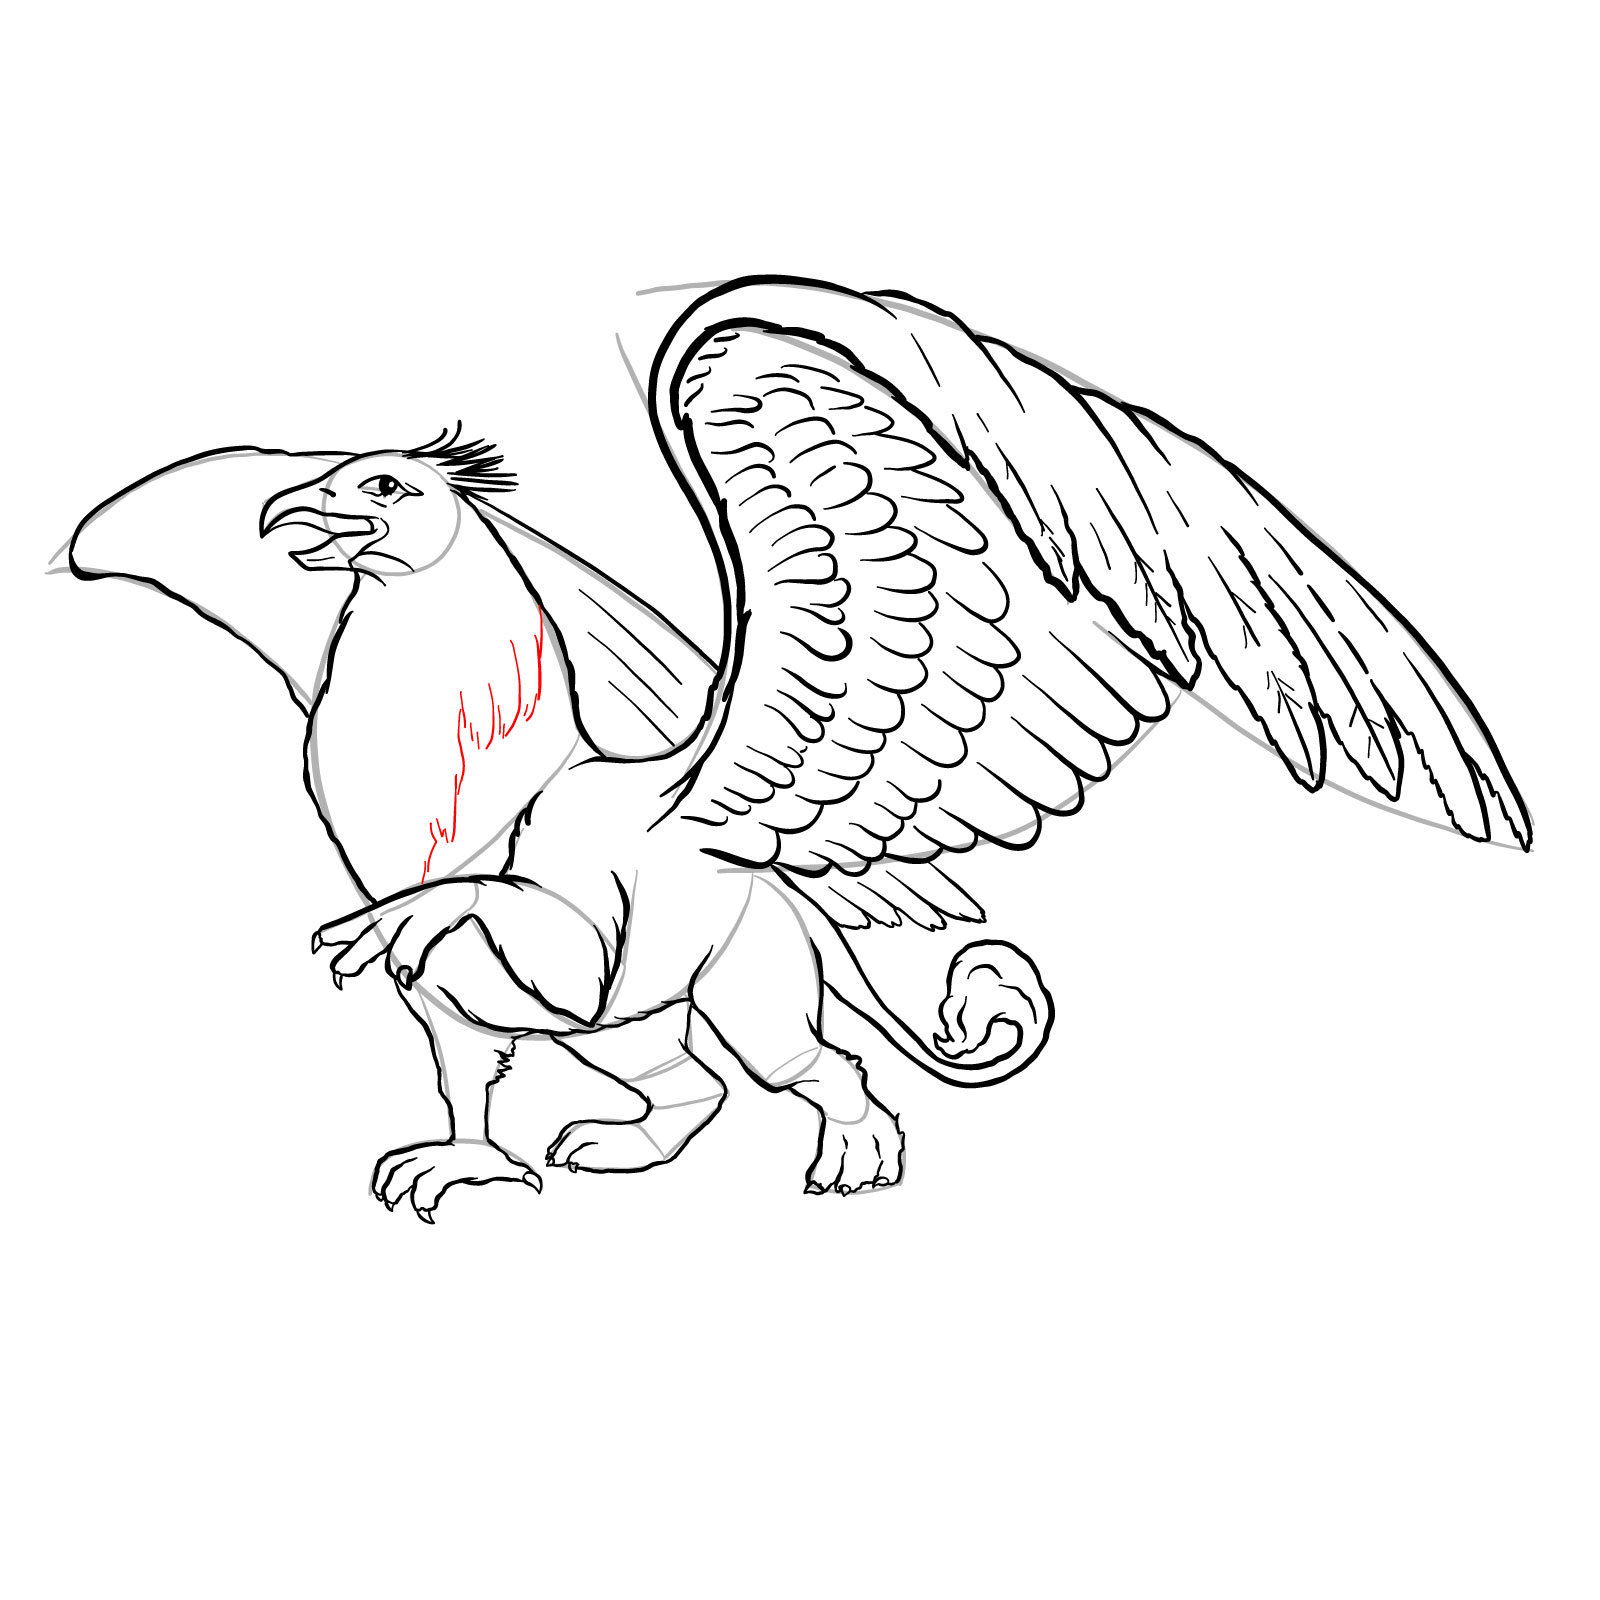 How to draw a Gryphon - Sketchok easy drawing guides